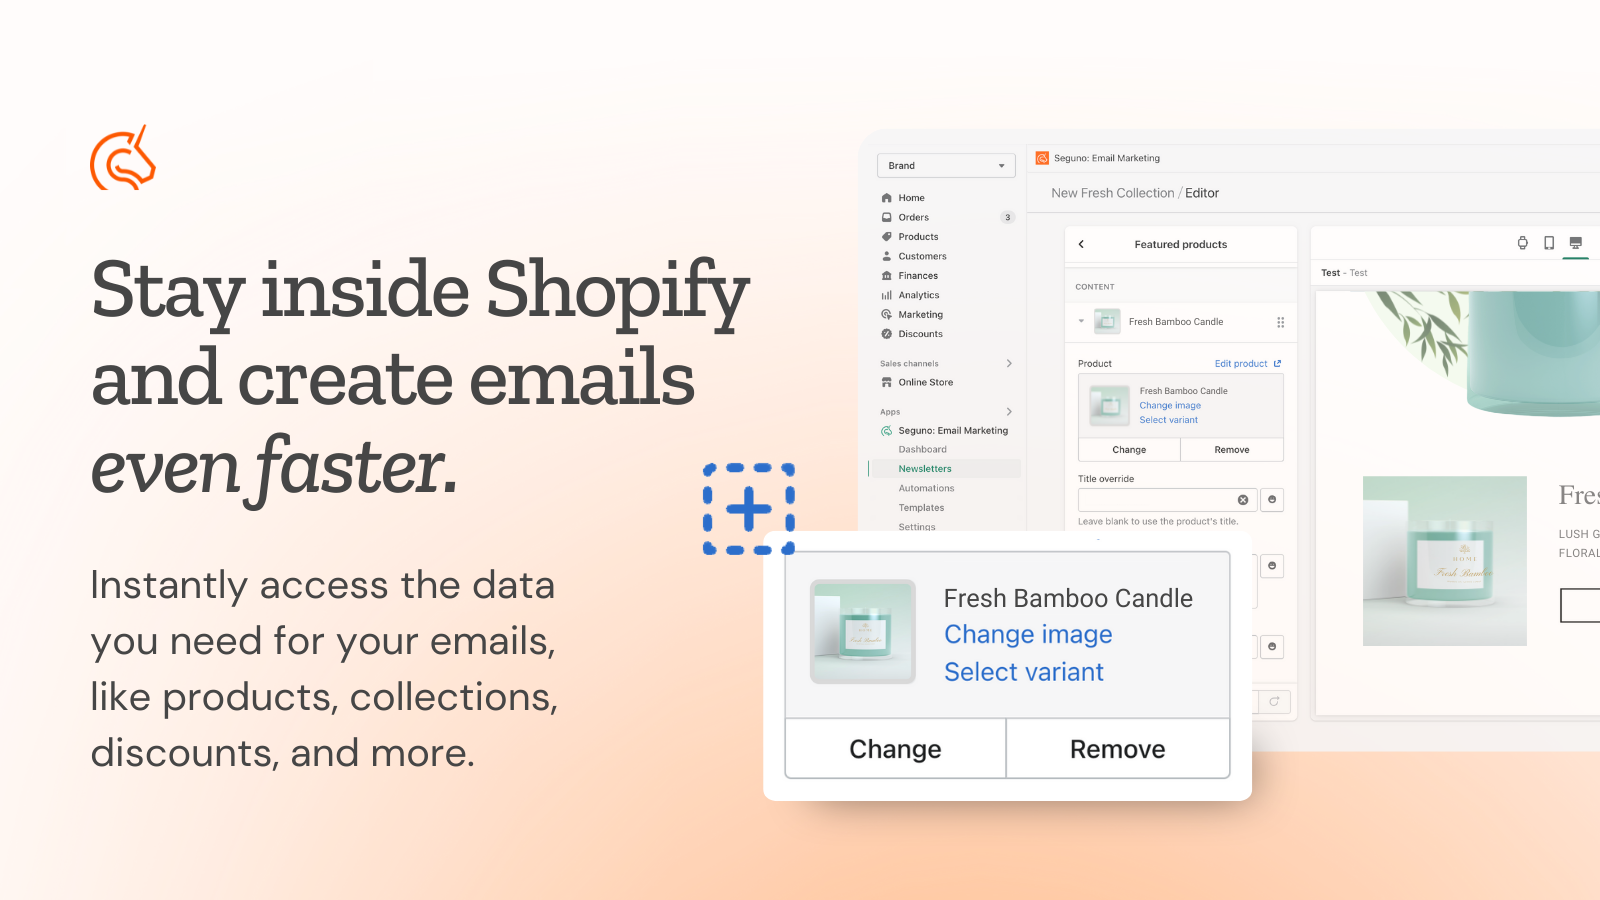 Pull products, discounts, and more directly into your emails